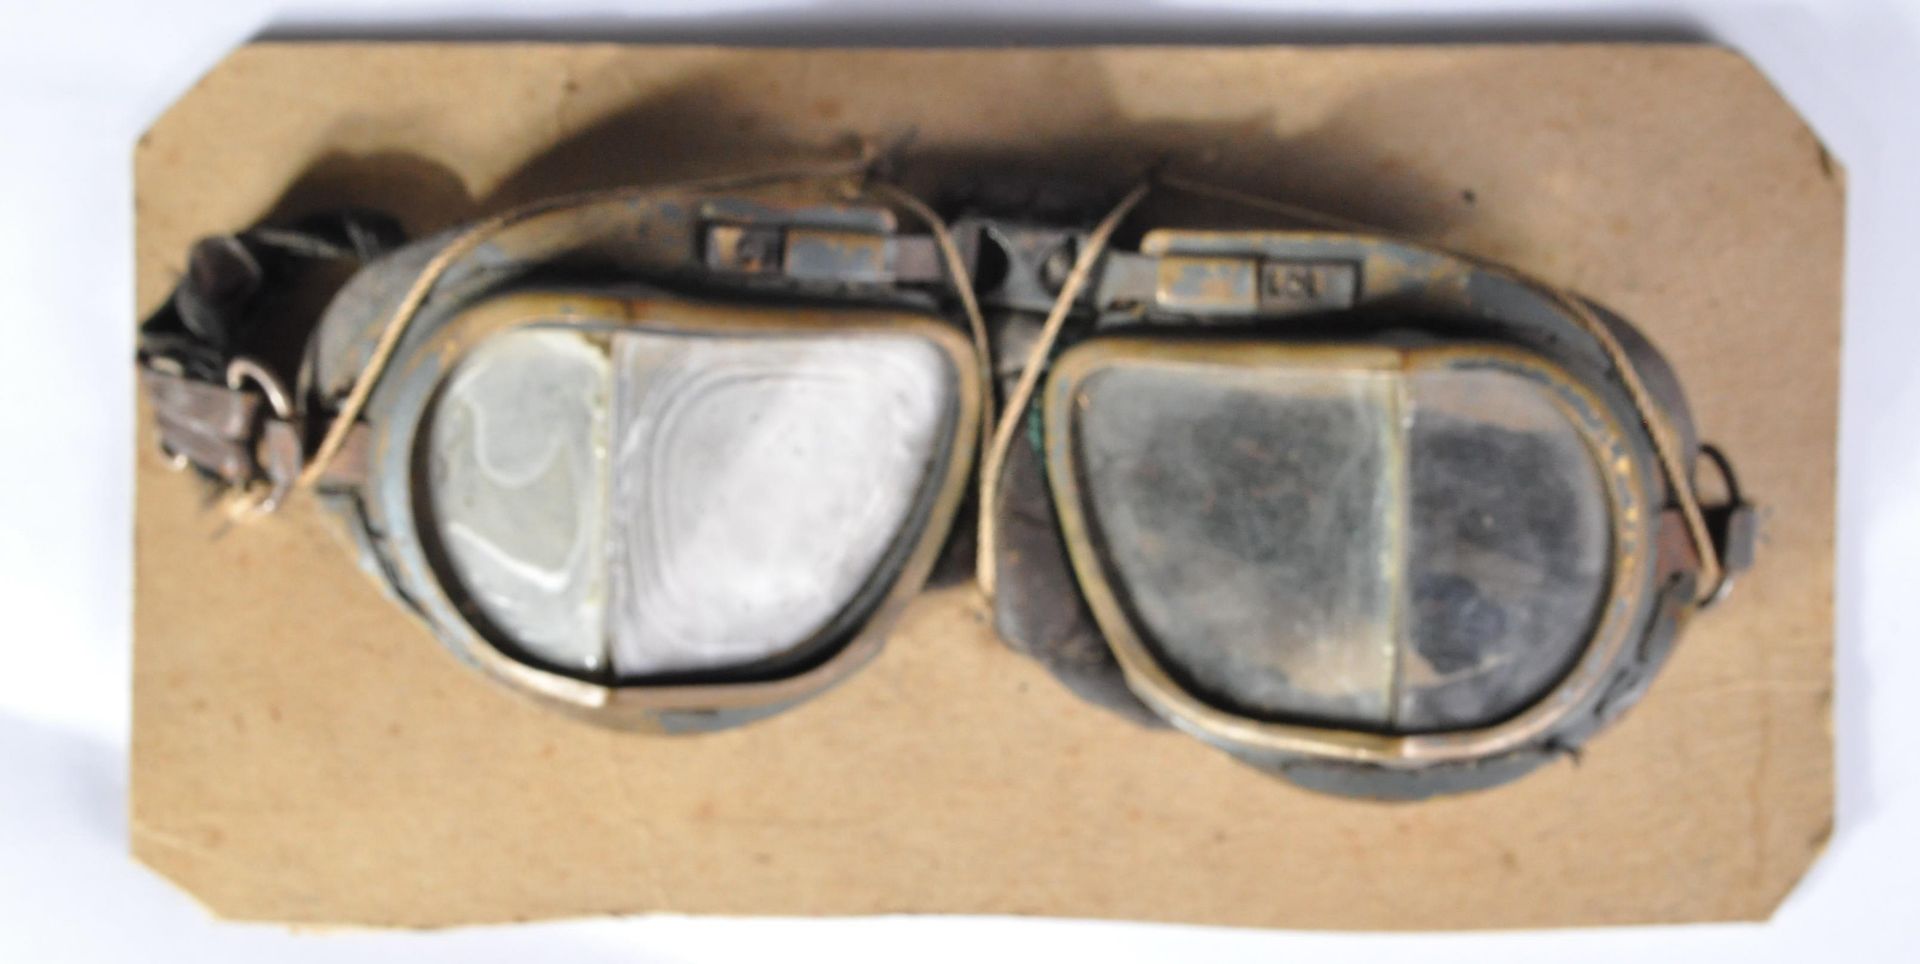 DAMBUSTERS / 617 SQN - PAIR OF FLYING GOGGLES FROM WRECKAGE - Image 2 of 6